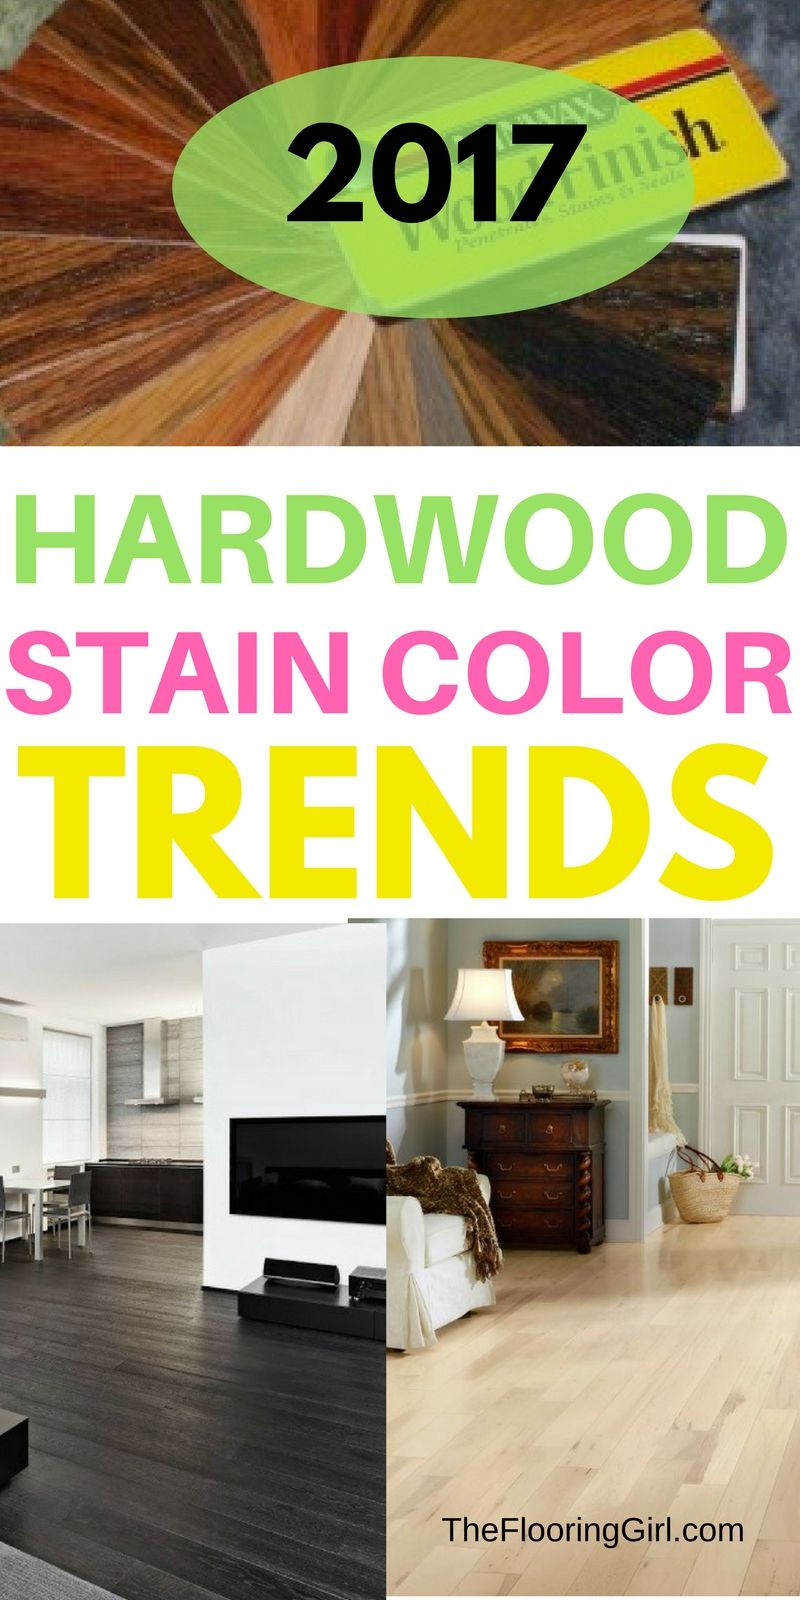 10 Unique Sand Refinish Hardwood Floors 2024 free download sand refinish hardwood floors of hardwood flooring stain color trends 2018 more from the flooring in hardwood flooring stain color trends for 2017 hardwood colors that are in style thefloori